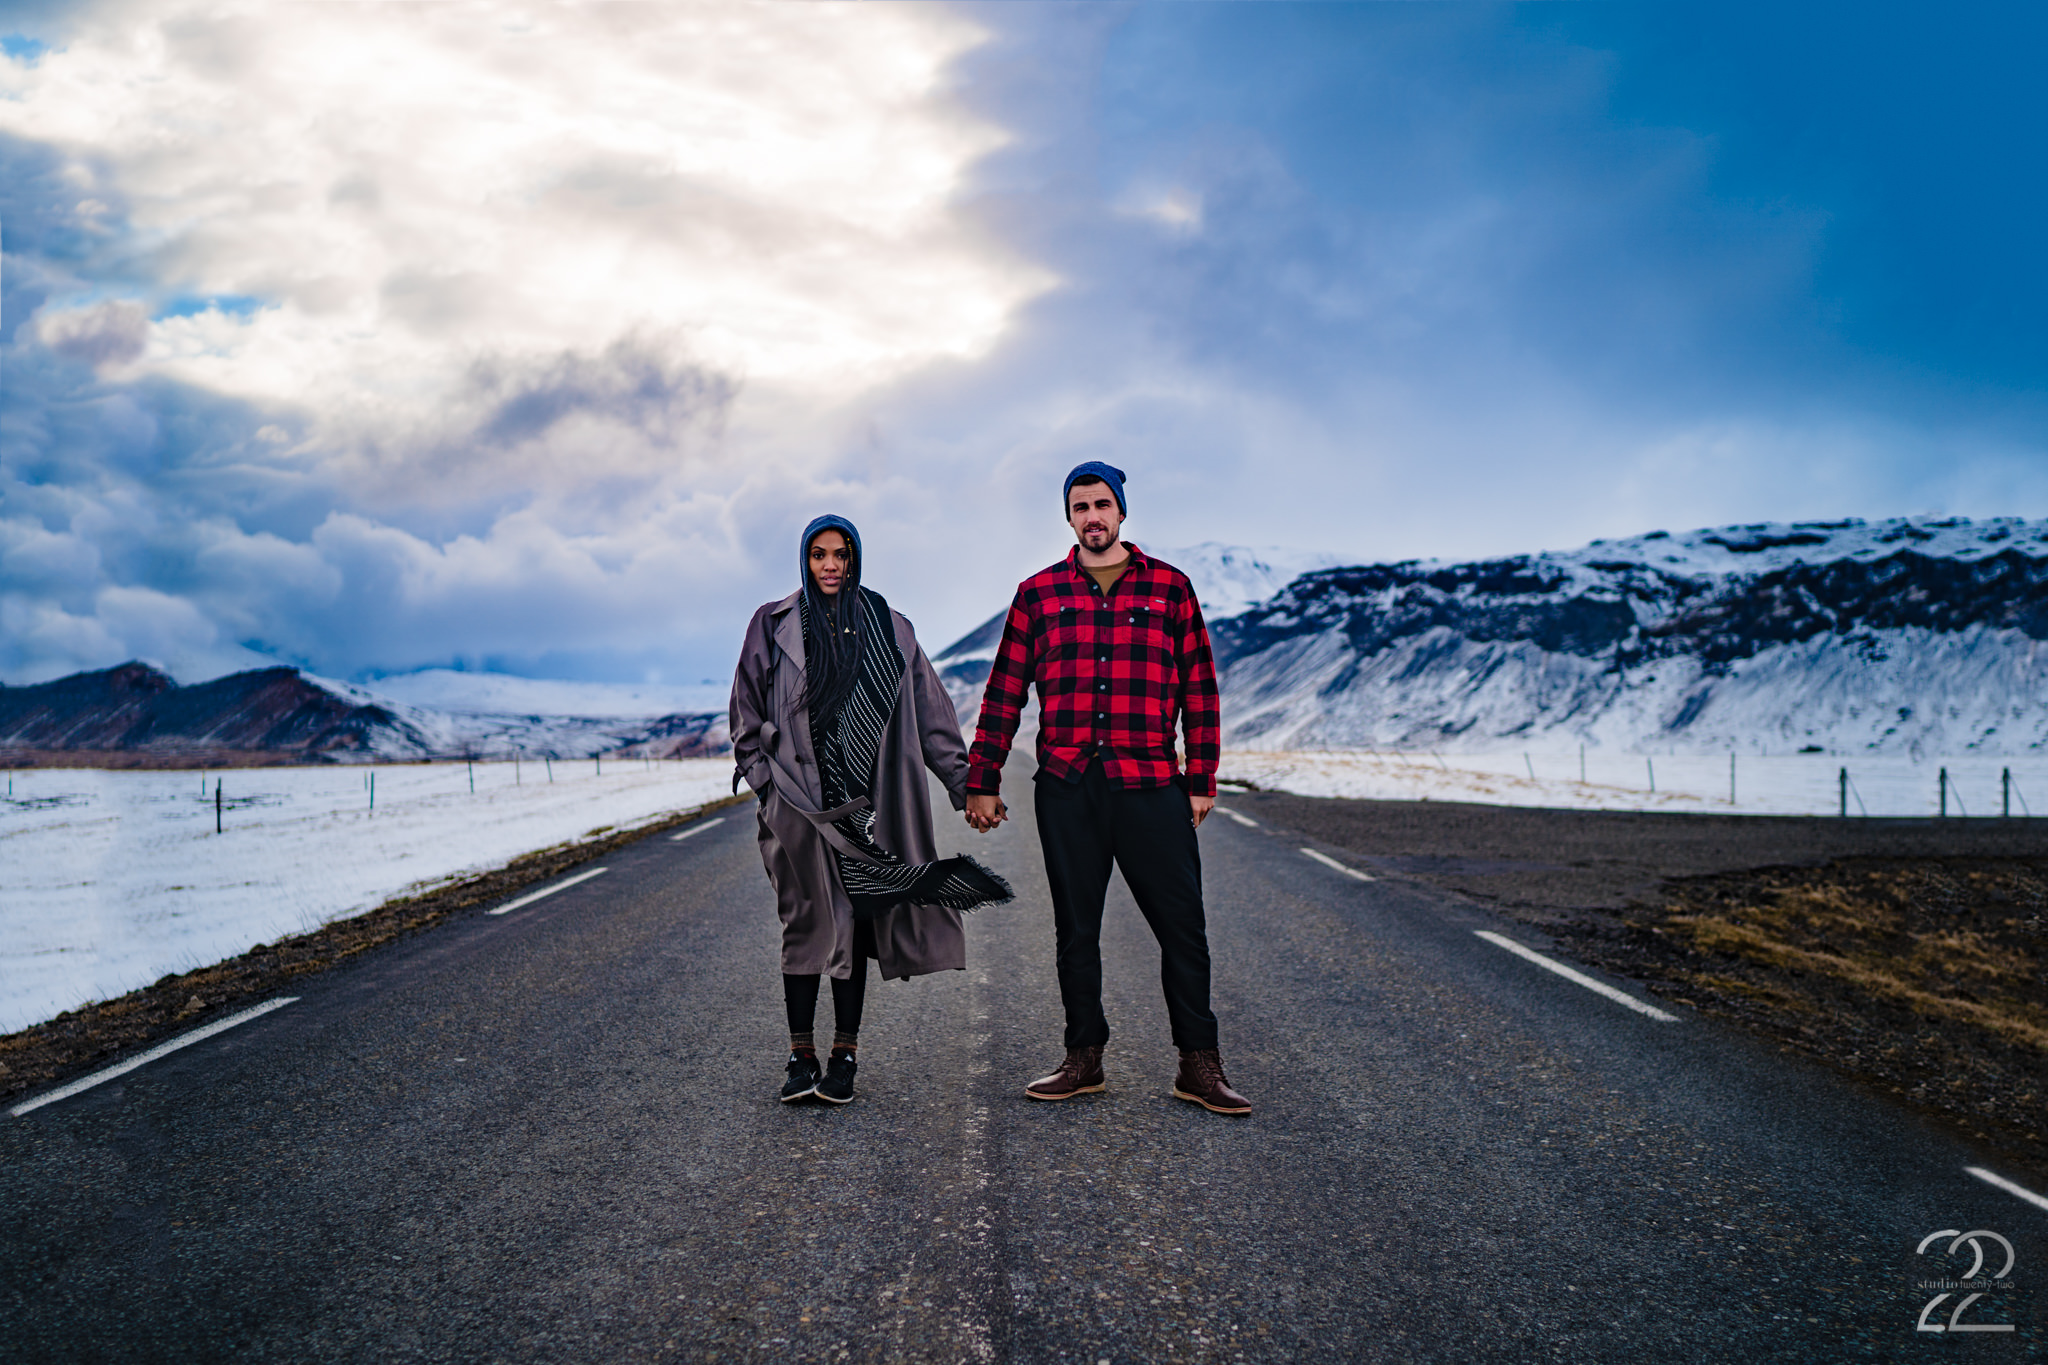  Winter couple’s shoots don’t have to mean freezing yourselves. Layers, accessories, and pops of colour can create cozy (and warm) portraits. Aubin did a fantastic job at pairing her jacket and scarf on this Iceland photoshoot with Studio 22 Photography. 